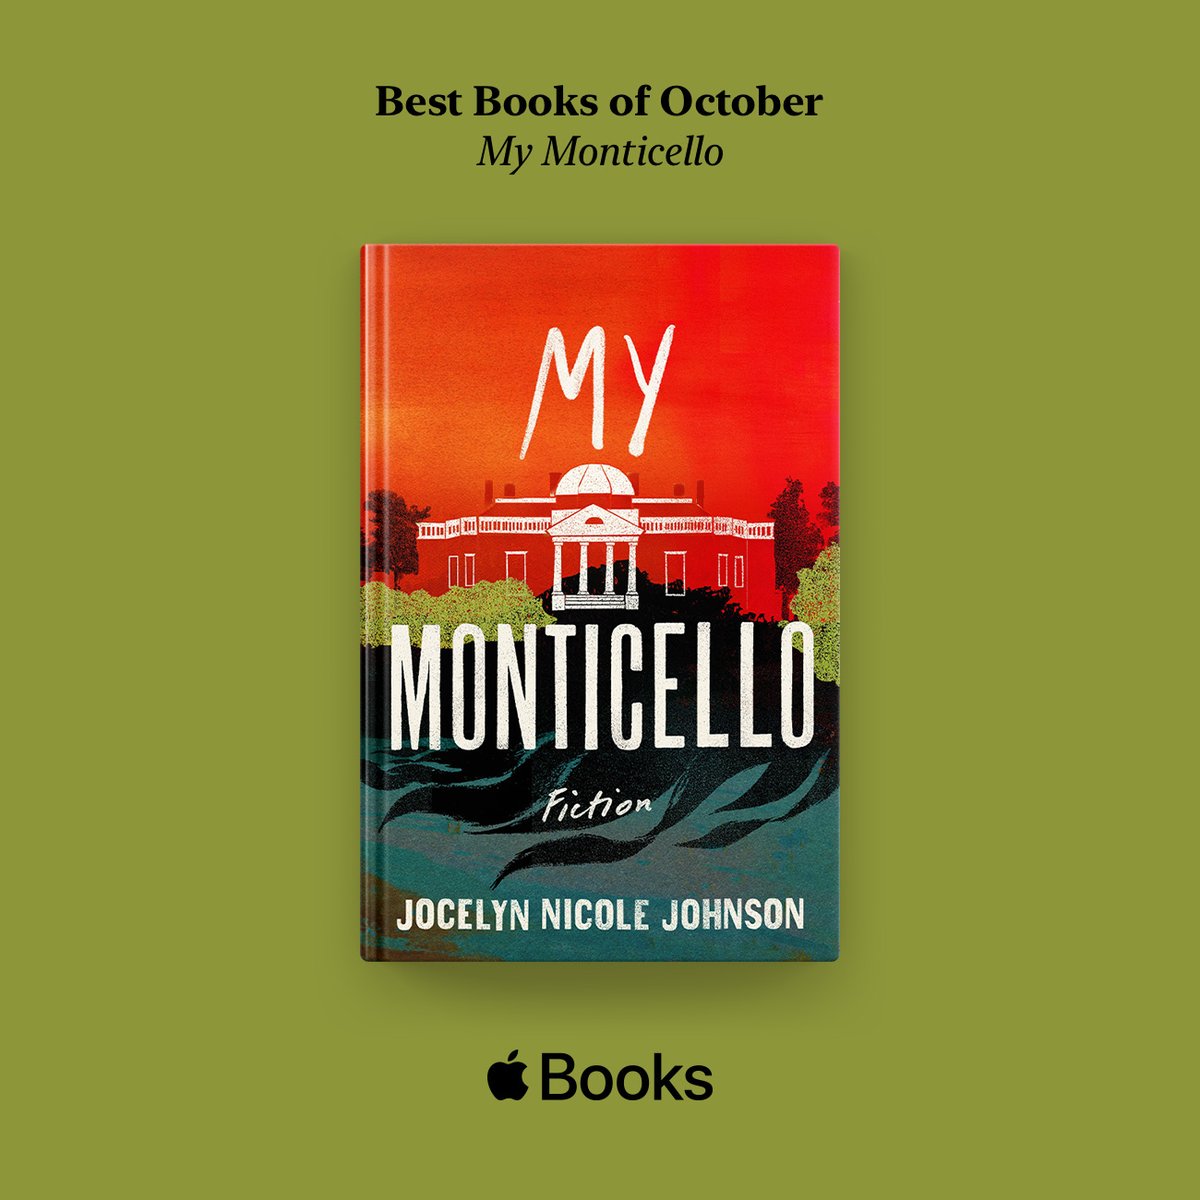 We are SO excited that @AppleBooks chose MY MONTICELLO by @jocelynjohnson as one of the #BestBooksOfOctober! ❤️Check it out here: apple.co/bestbooks